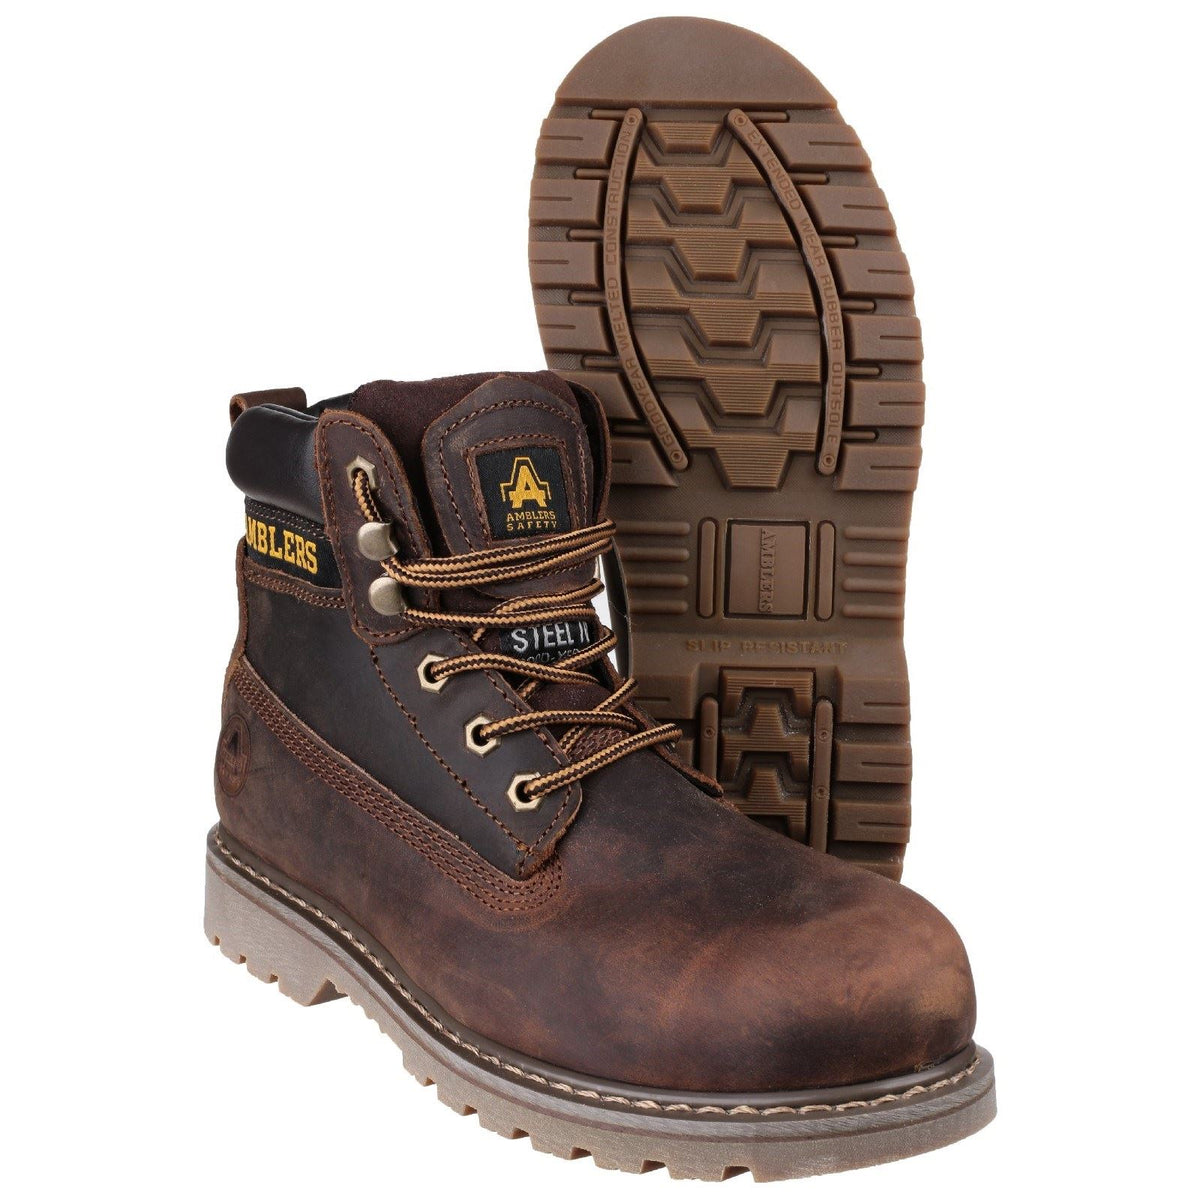 Amblers Safety FS164 Industrial Safety Boots